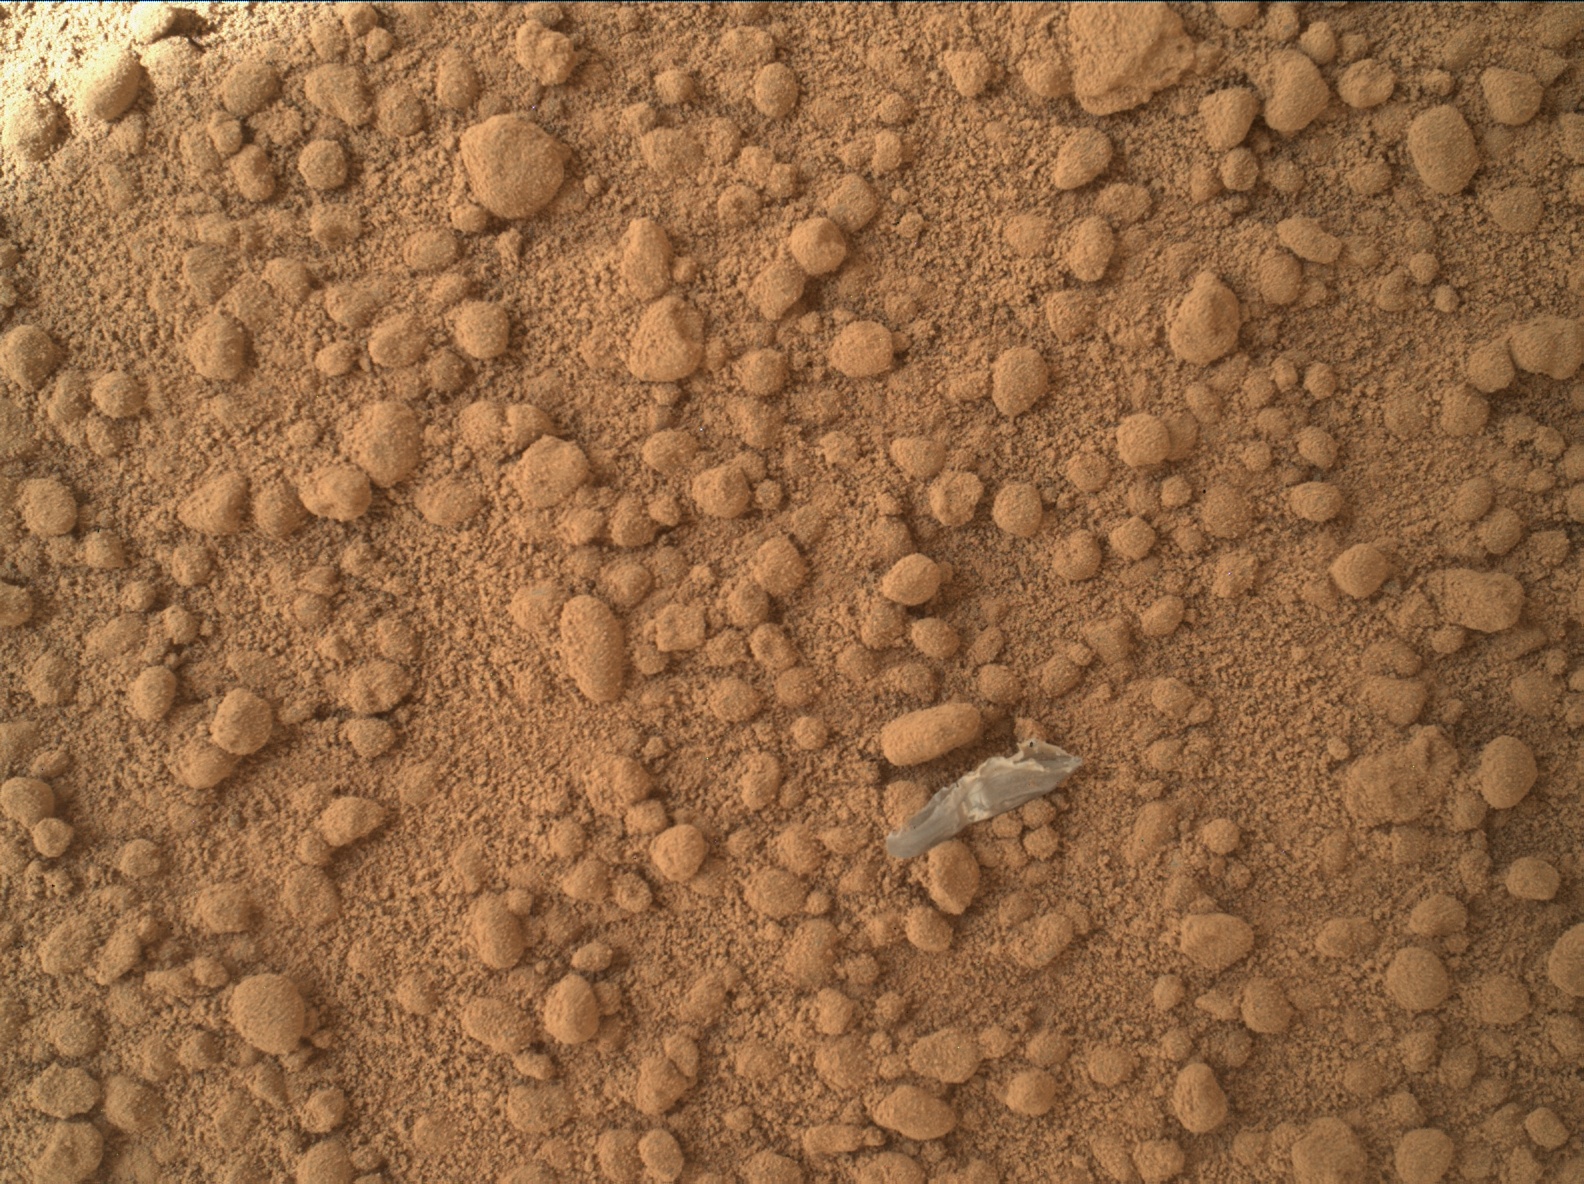 Nasa's Mars rover Curiosity acquired this image using its Mars Hand Lens Imager (MAHLI) on Sol 65